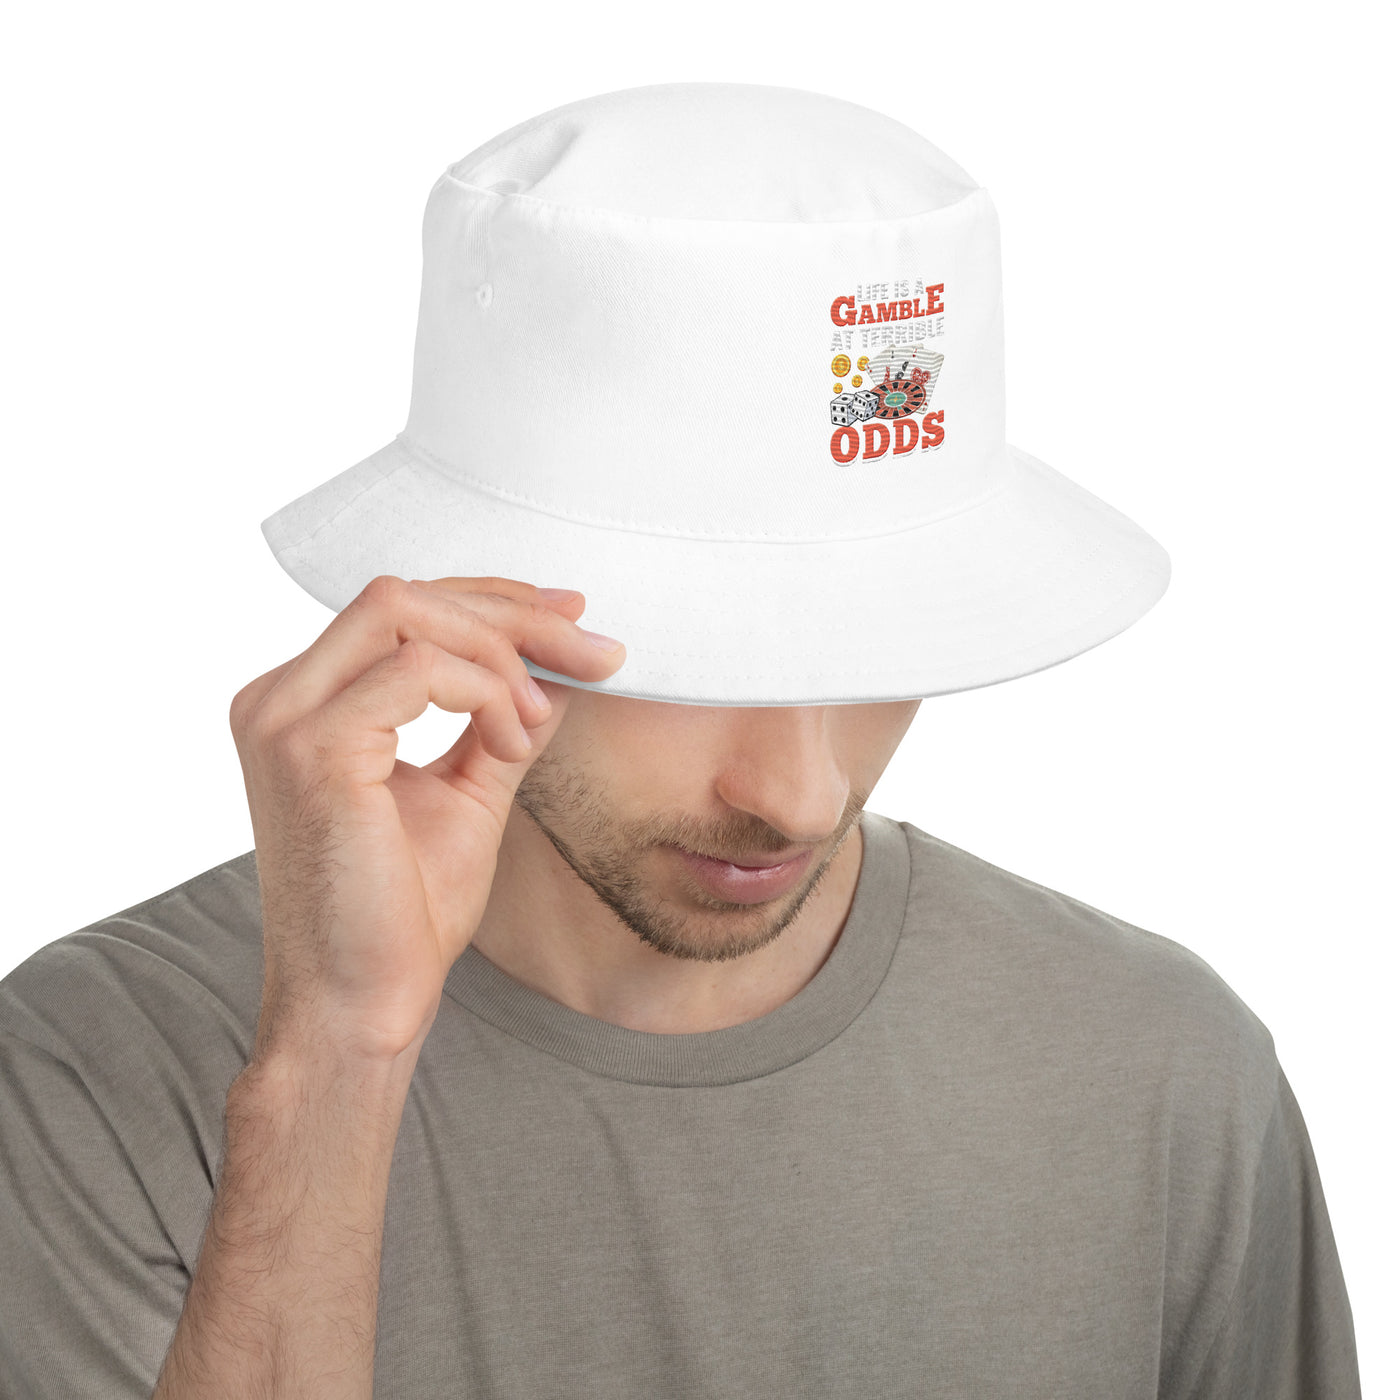 Life is a Gamble at terrible Odds - Bucket Hat